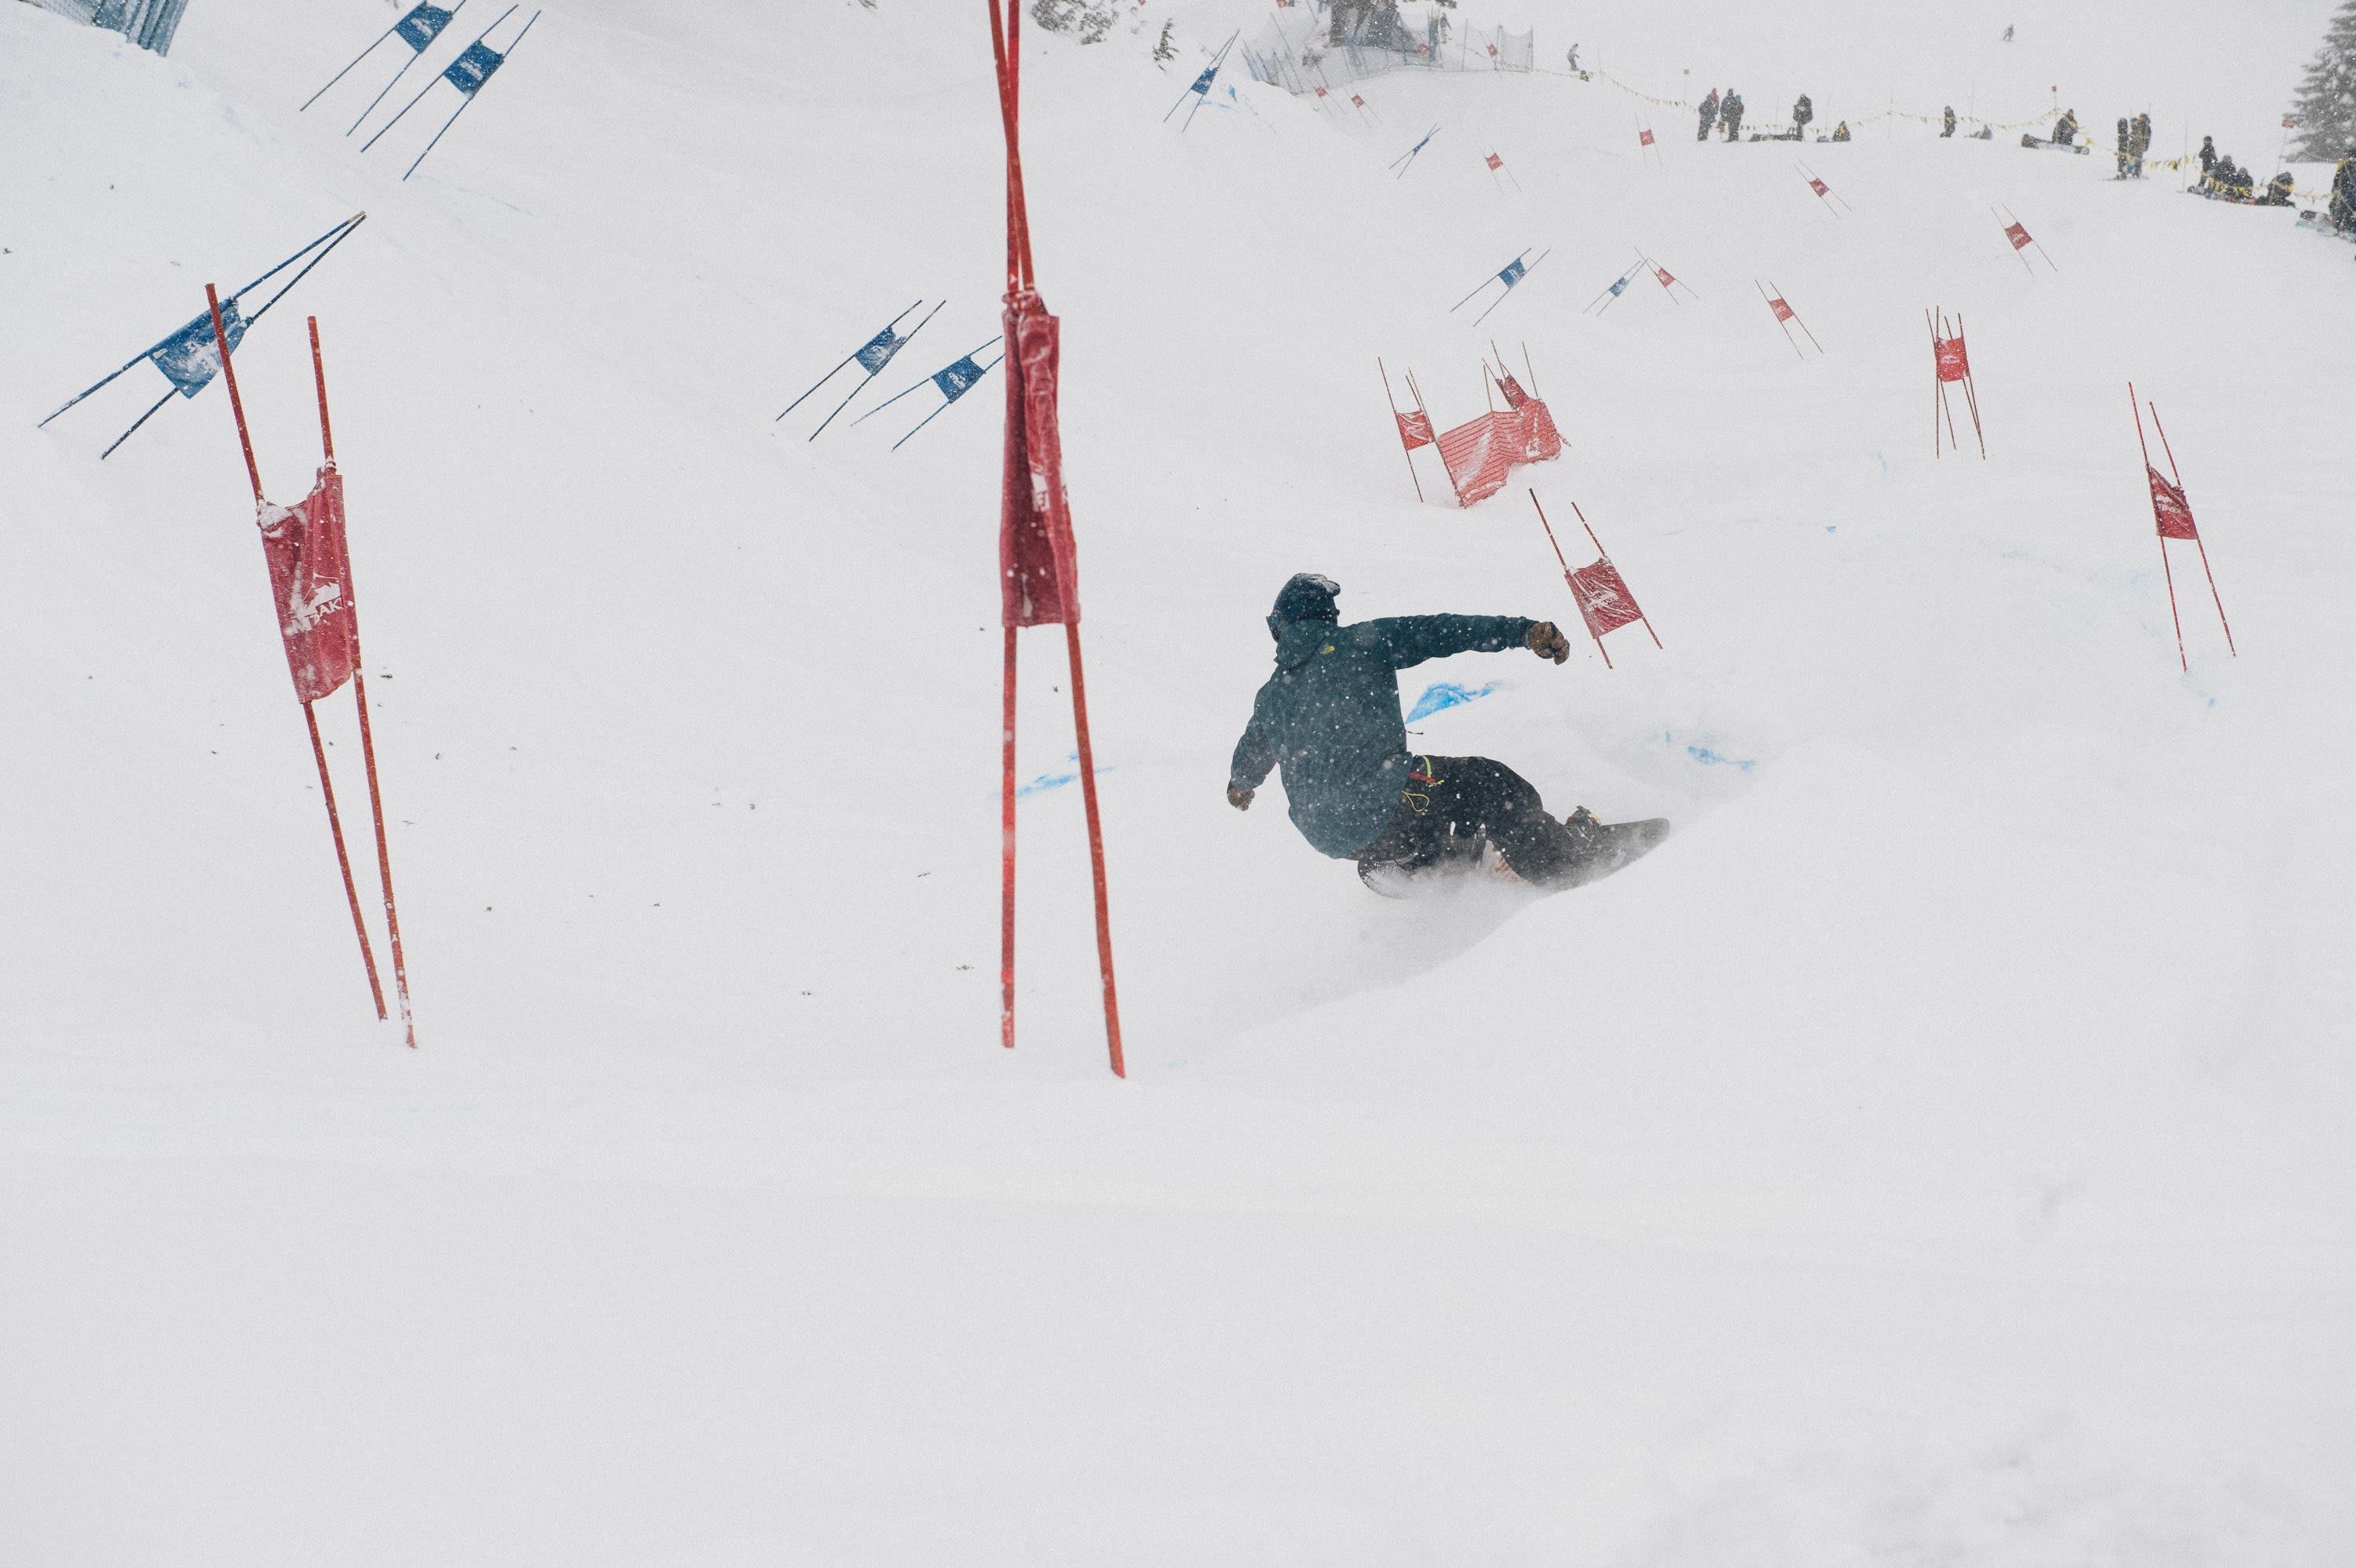 Photos From The Mt. Baker Banked Slalom